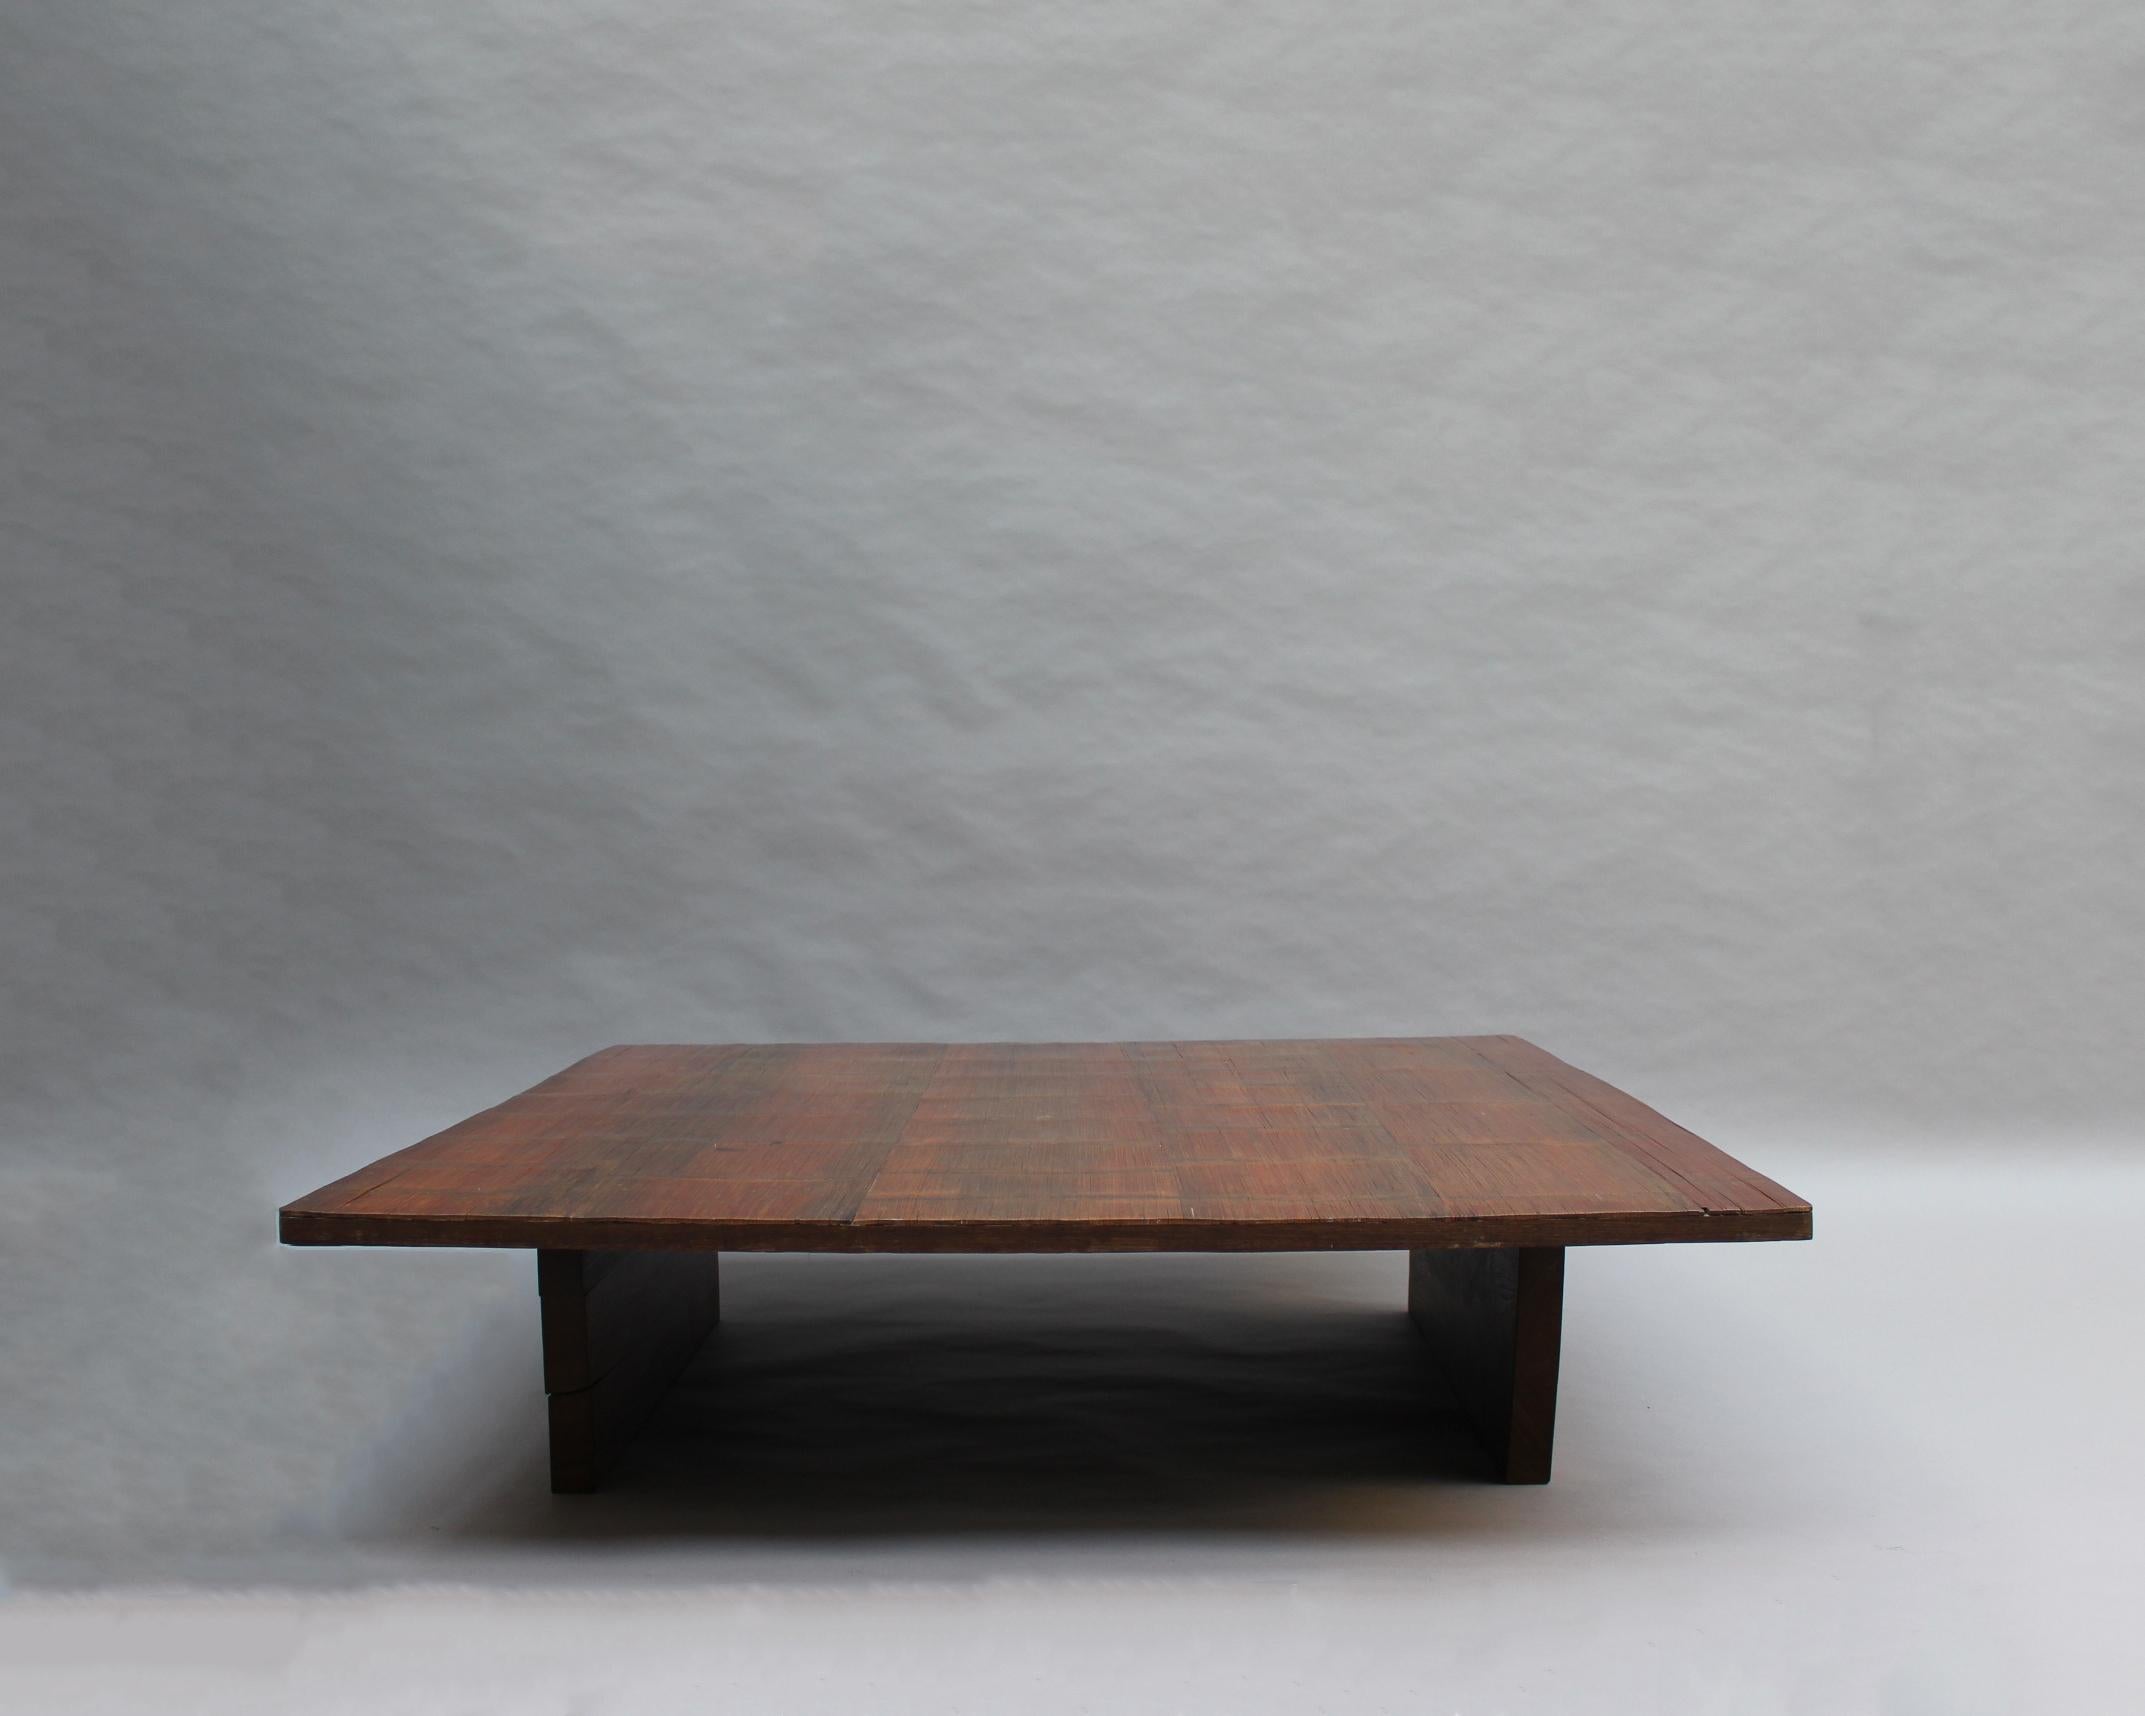 A large low square table with a bamboo top on a solid wenge wood base.
This table was part of a décor by Axel Vervoordt, as shown on his book, page 25, edited by Assouline.


